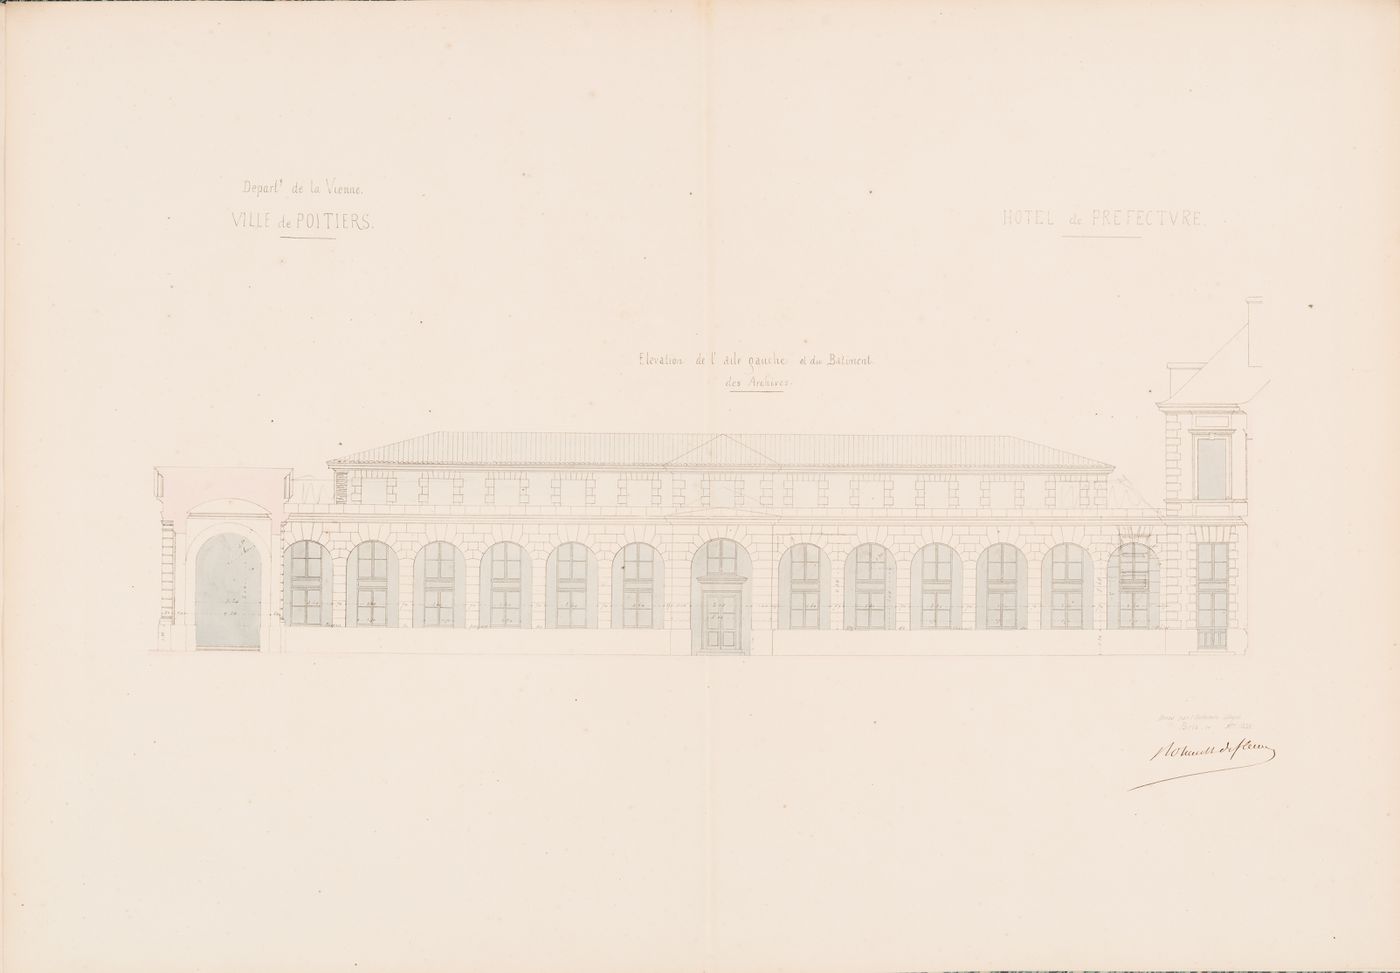 Project for a Hôtel de préfecture, Poitiers: Elevation for the principal façades of the offices and the Archives building